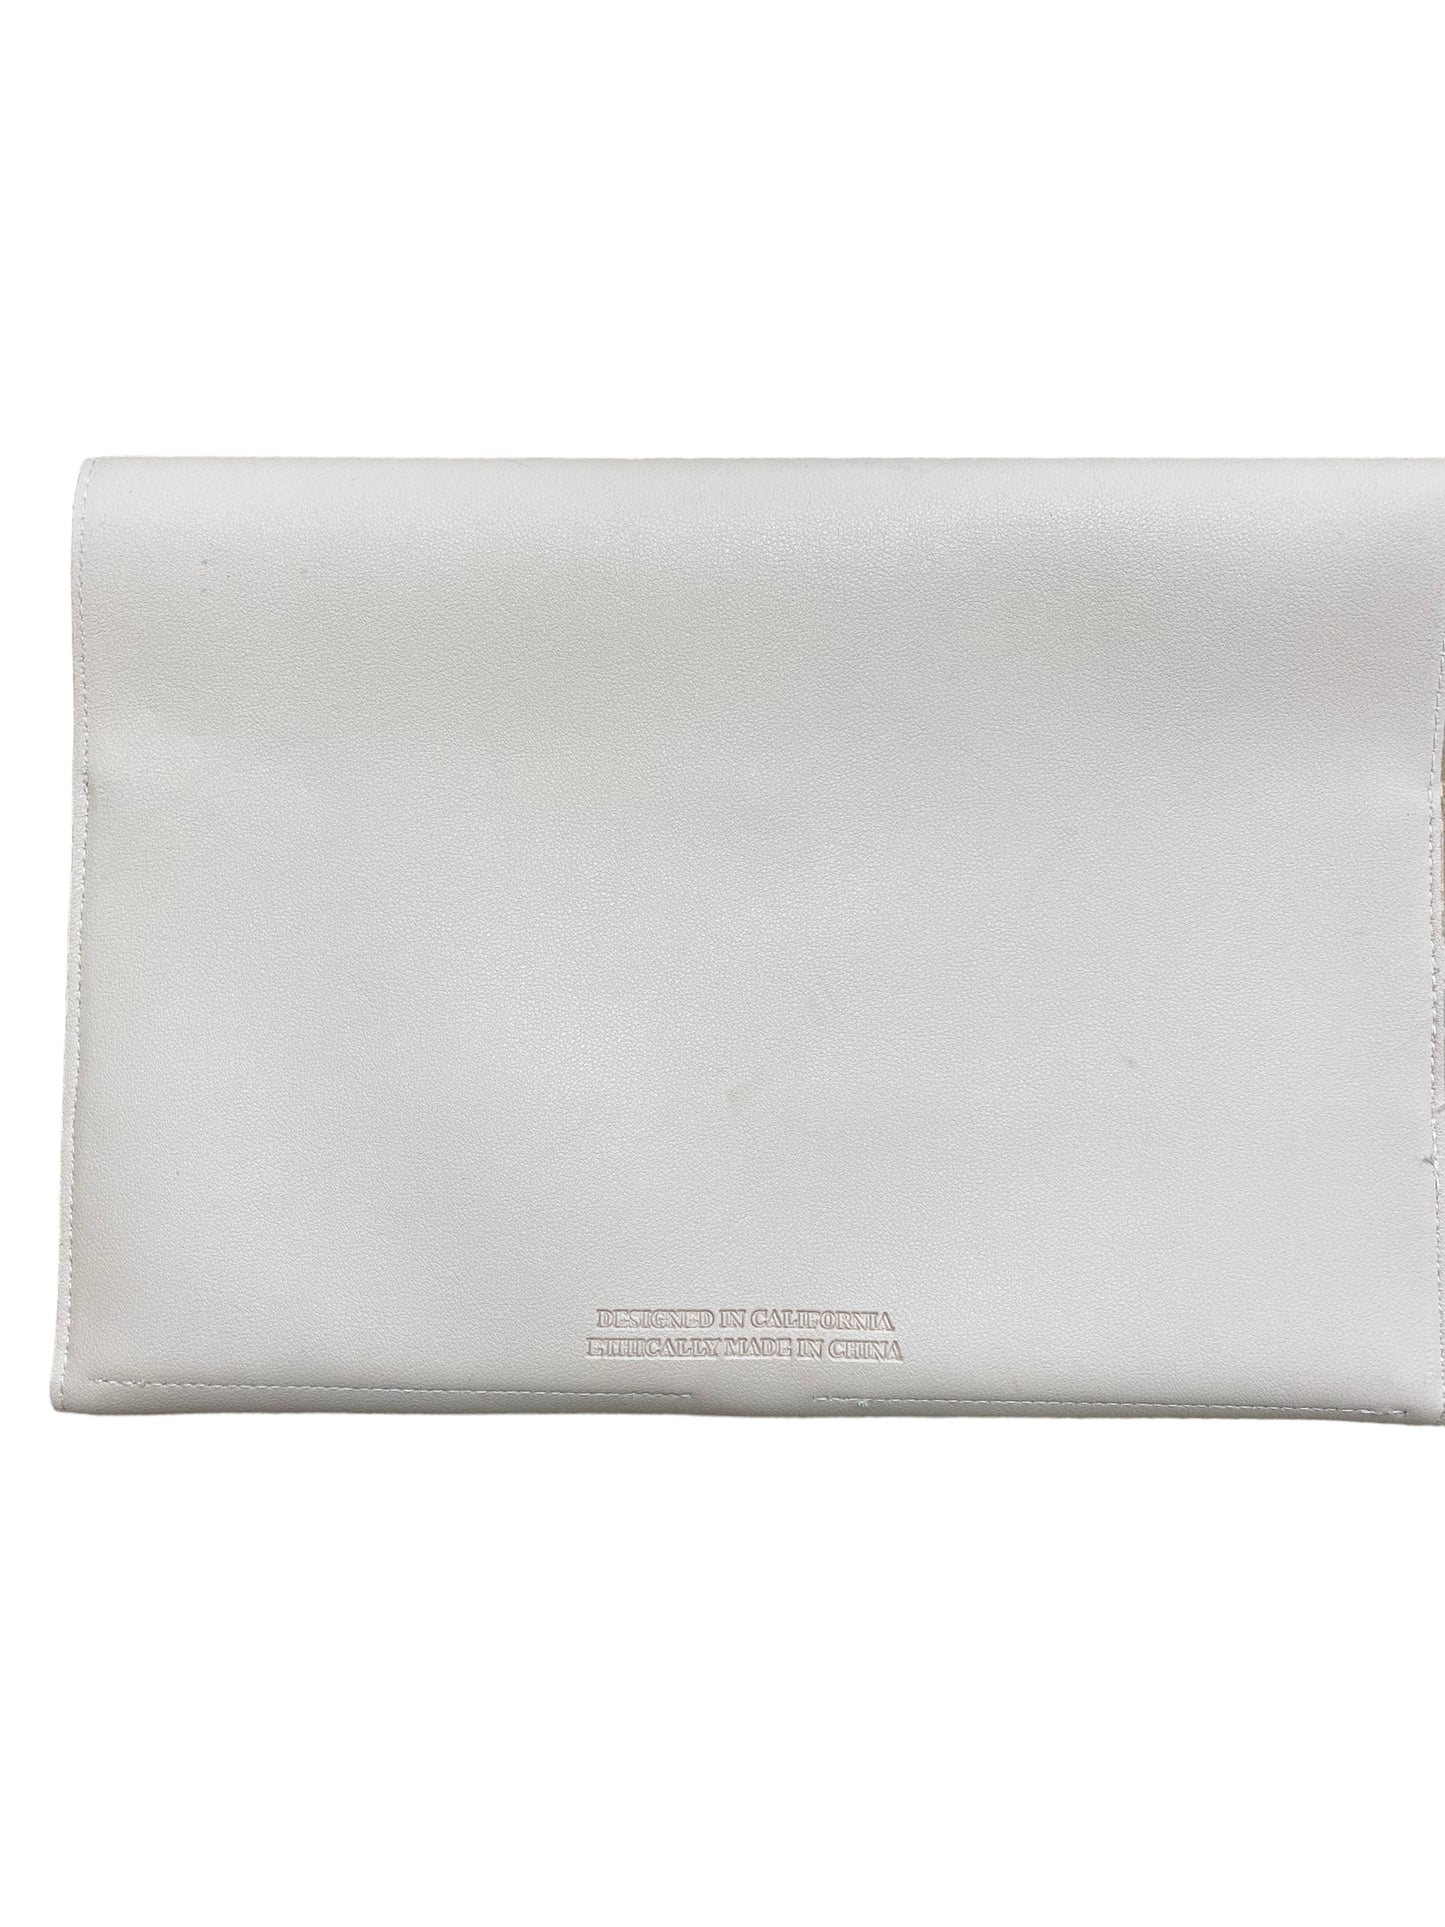 Clutch By Clothes Mentor  Size: Large